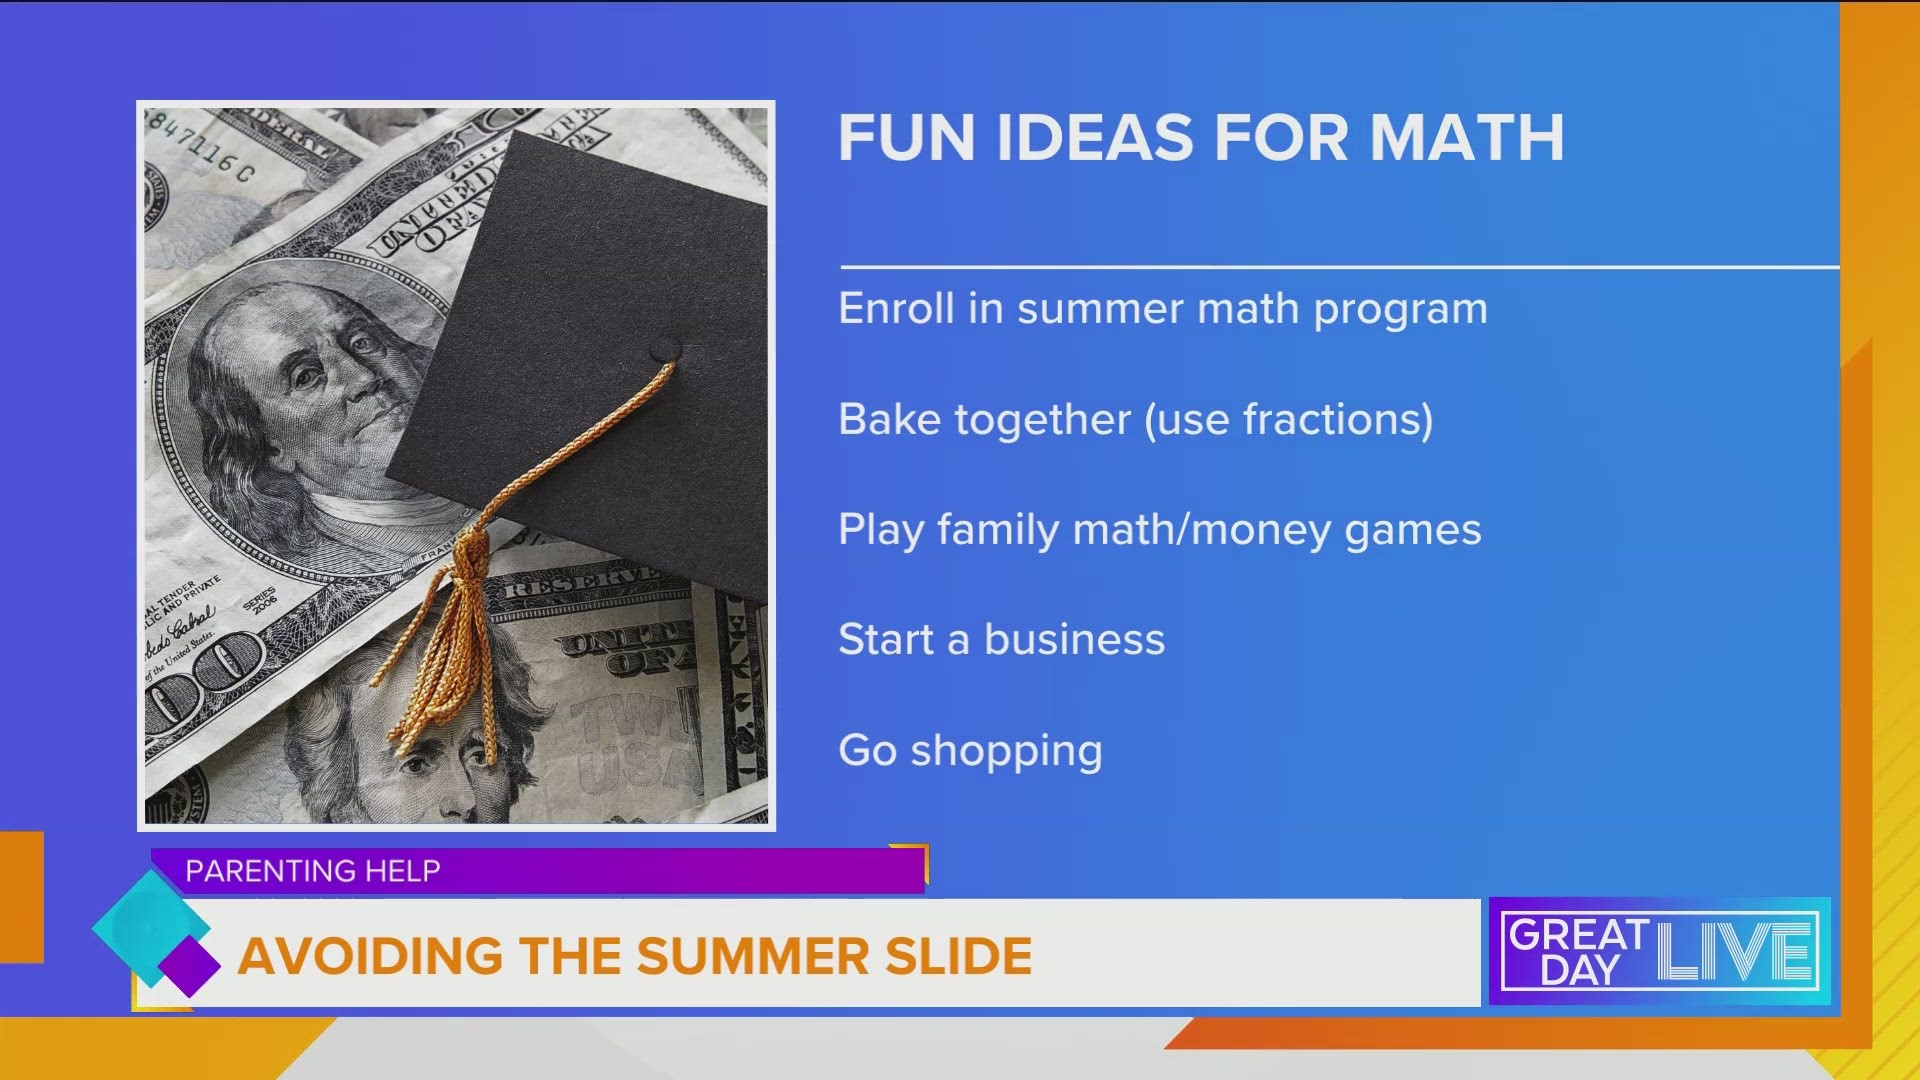 Melissa David from Mathnasium in Largo shares tips on how to make Math fun this summer.